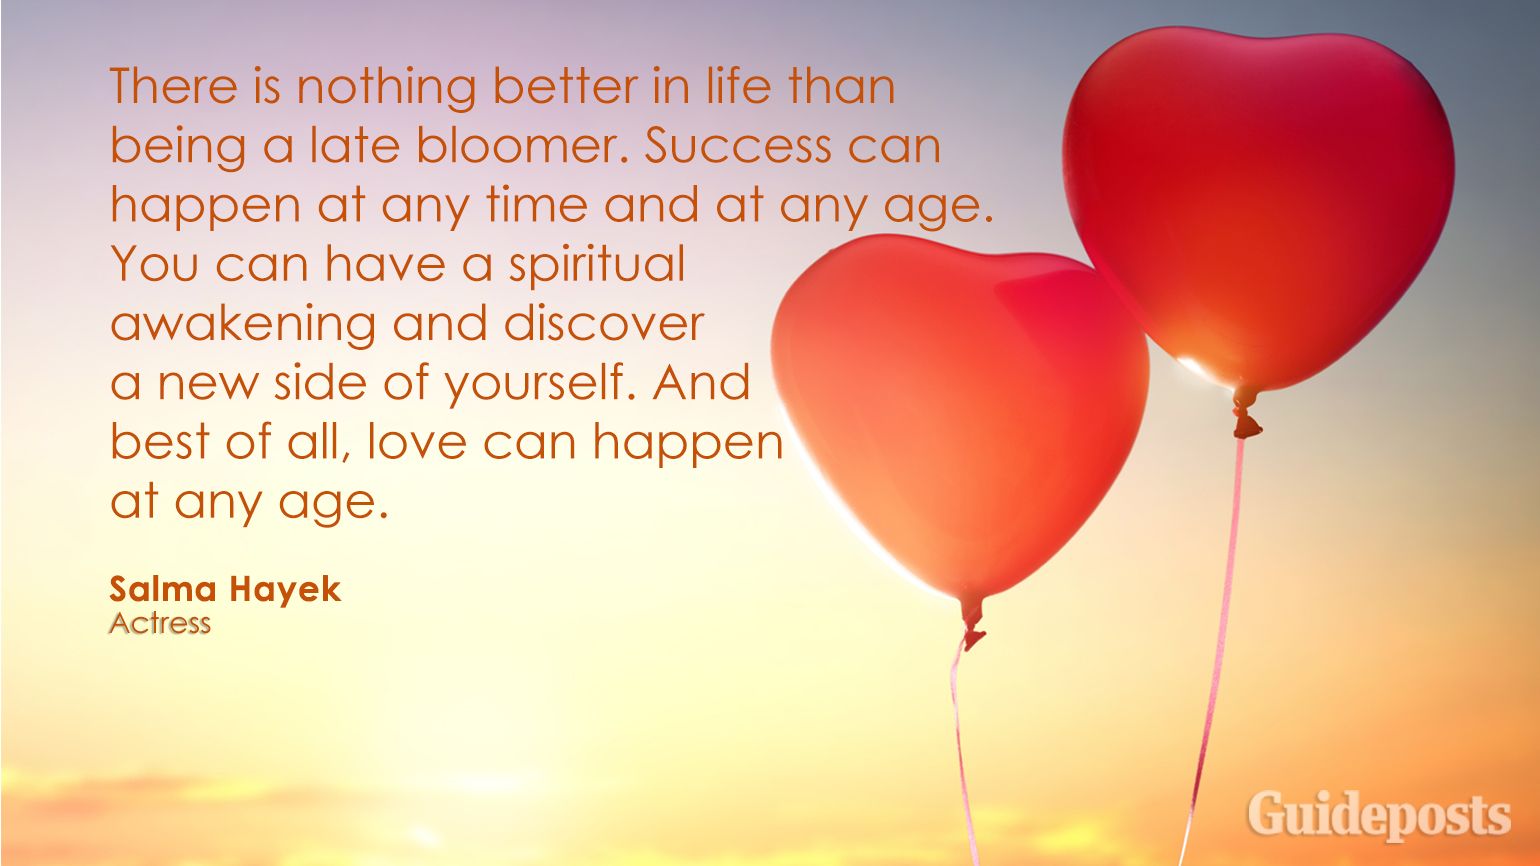 There is nothing better in life than being a late bloomer. Success can happen at any time and at any age. You can have a spiritual awakening and discover a new side of yourself. And best of all, love can happen at any age.